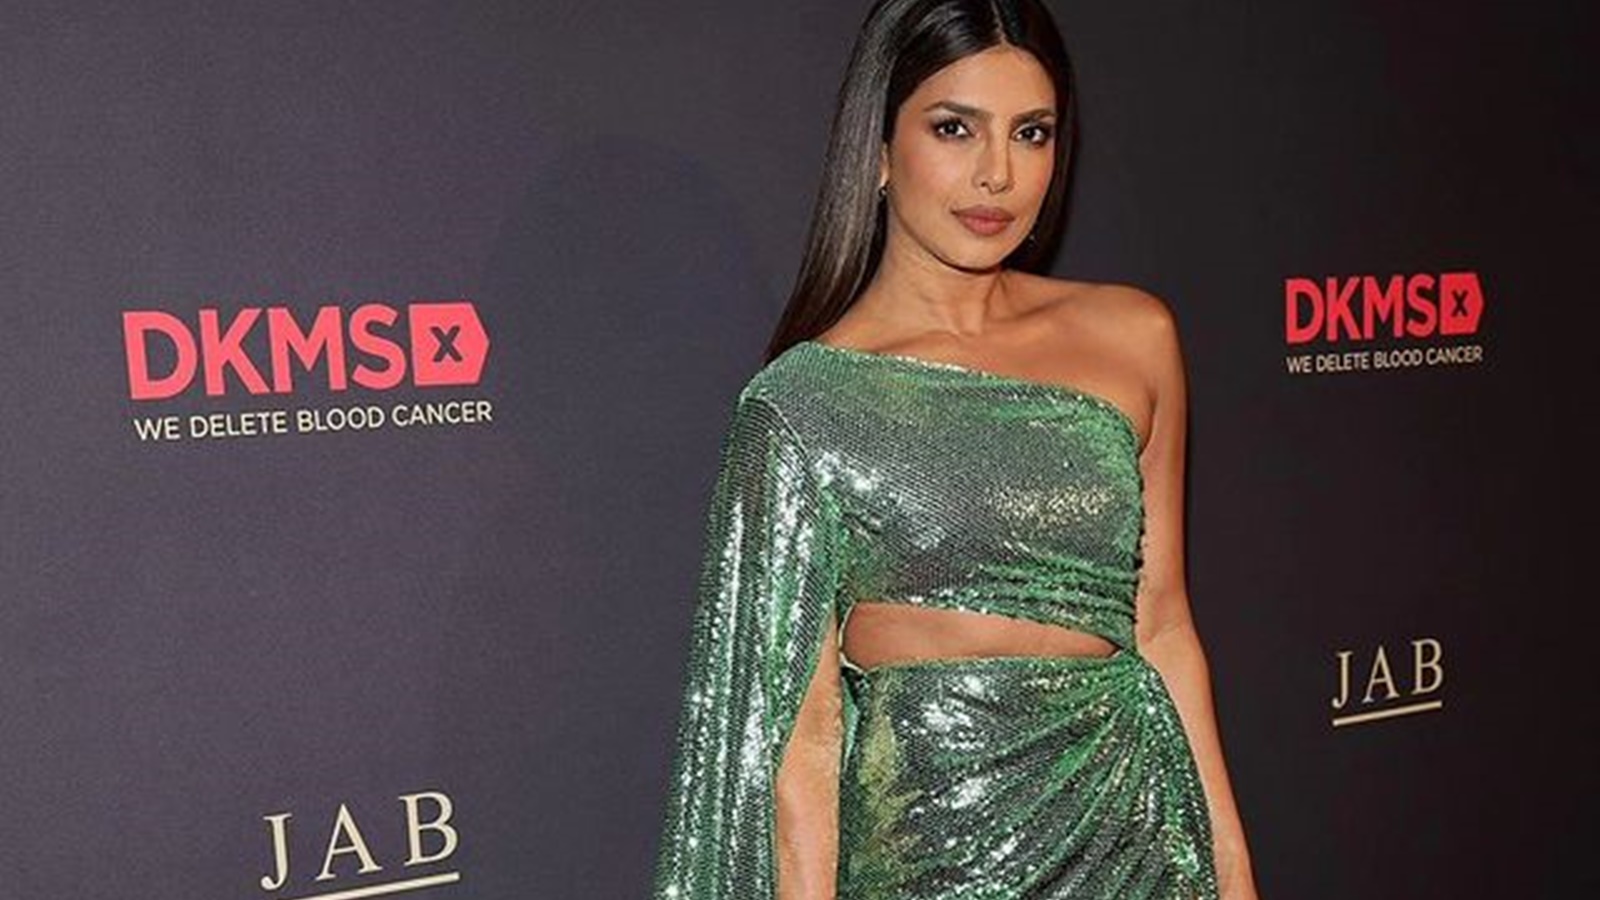 Priyanka Sexy Hd Videos - Priyanka Chopra's latest photos from DKMS Gala 2023 show her at shimmery  best, fan calls her 'most beautiful woman in the world' | Bollywood News -  The Indian Express